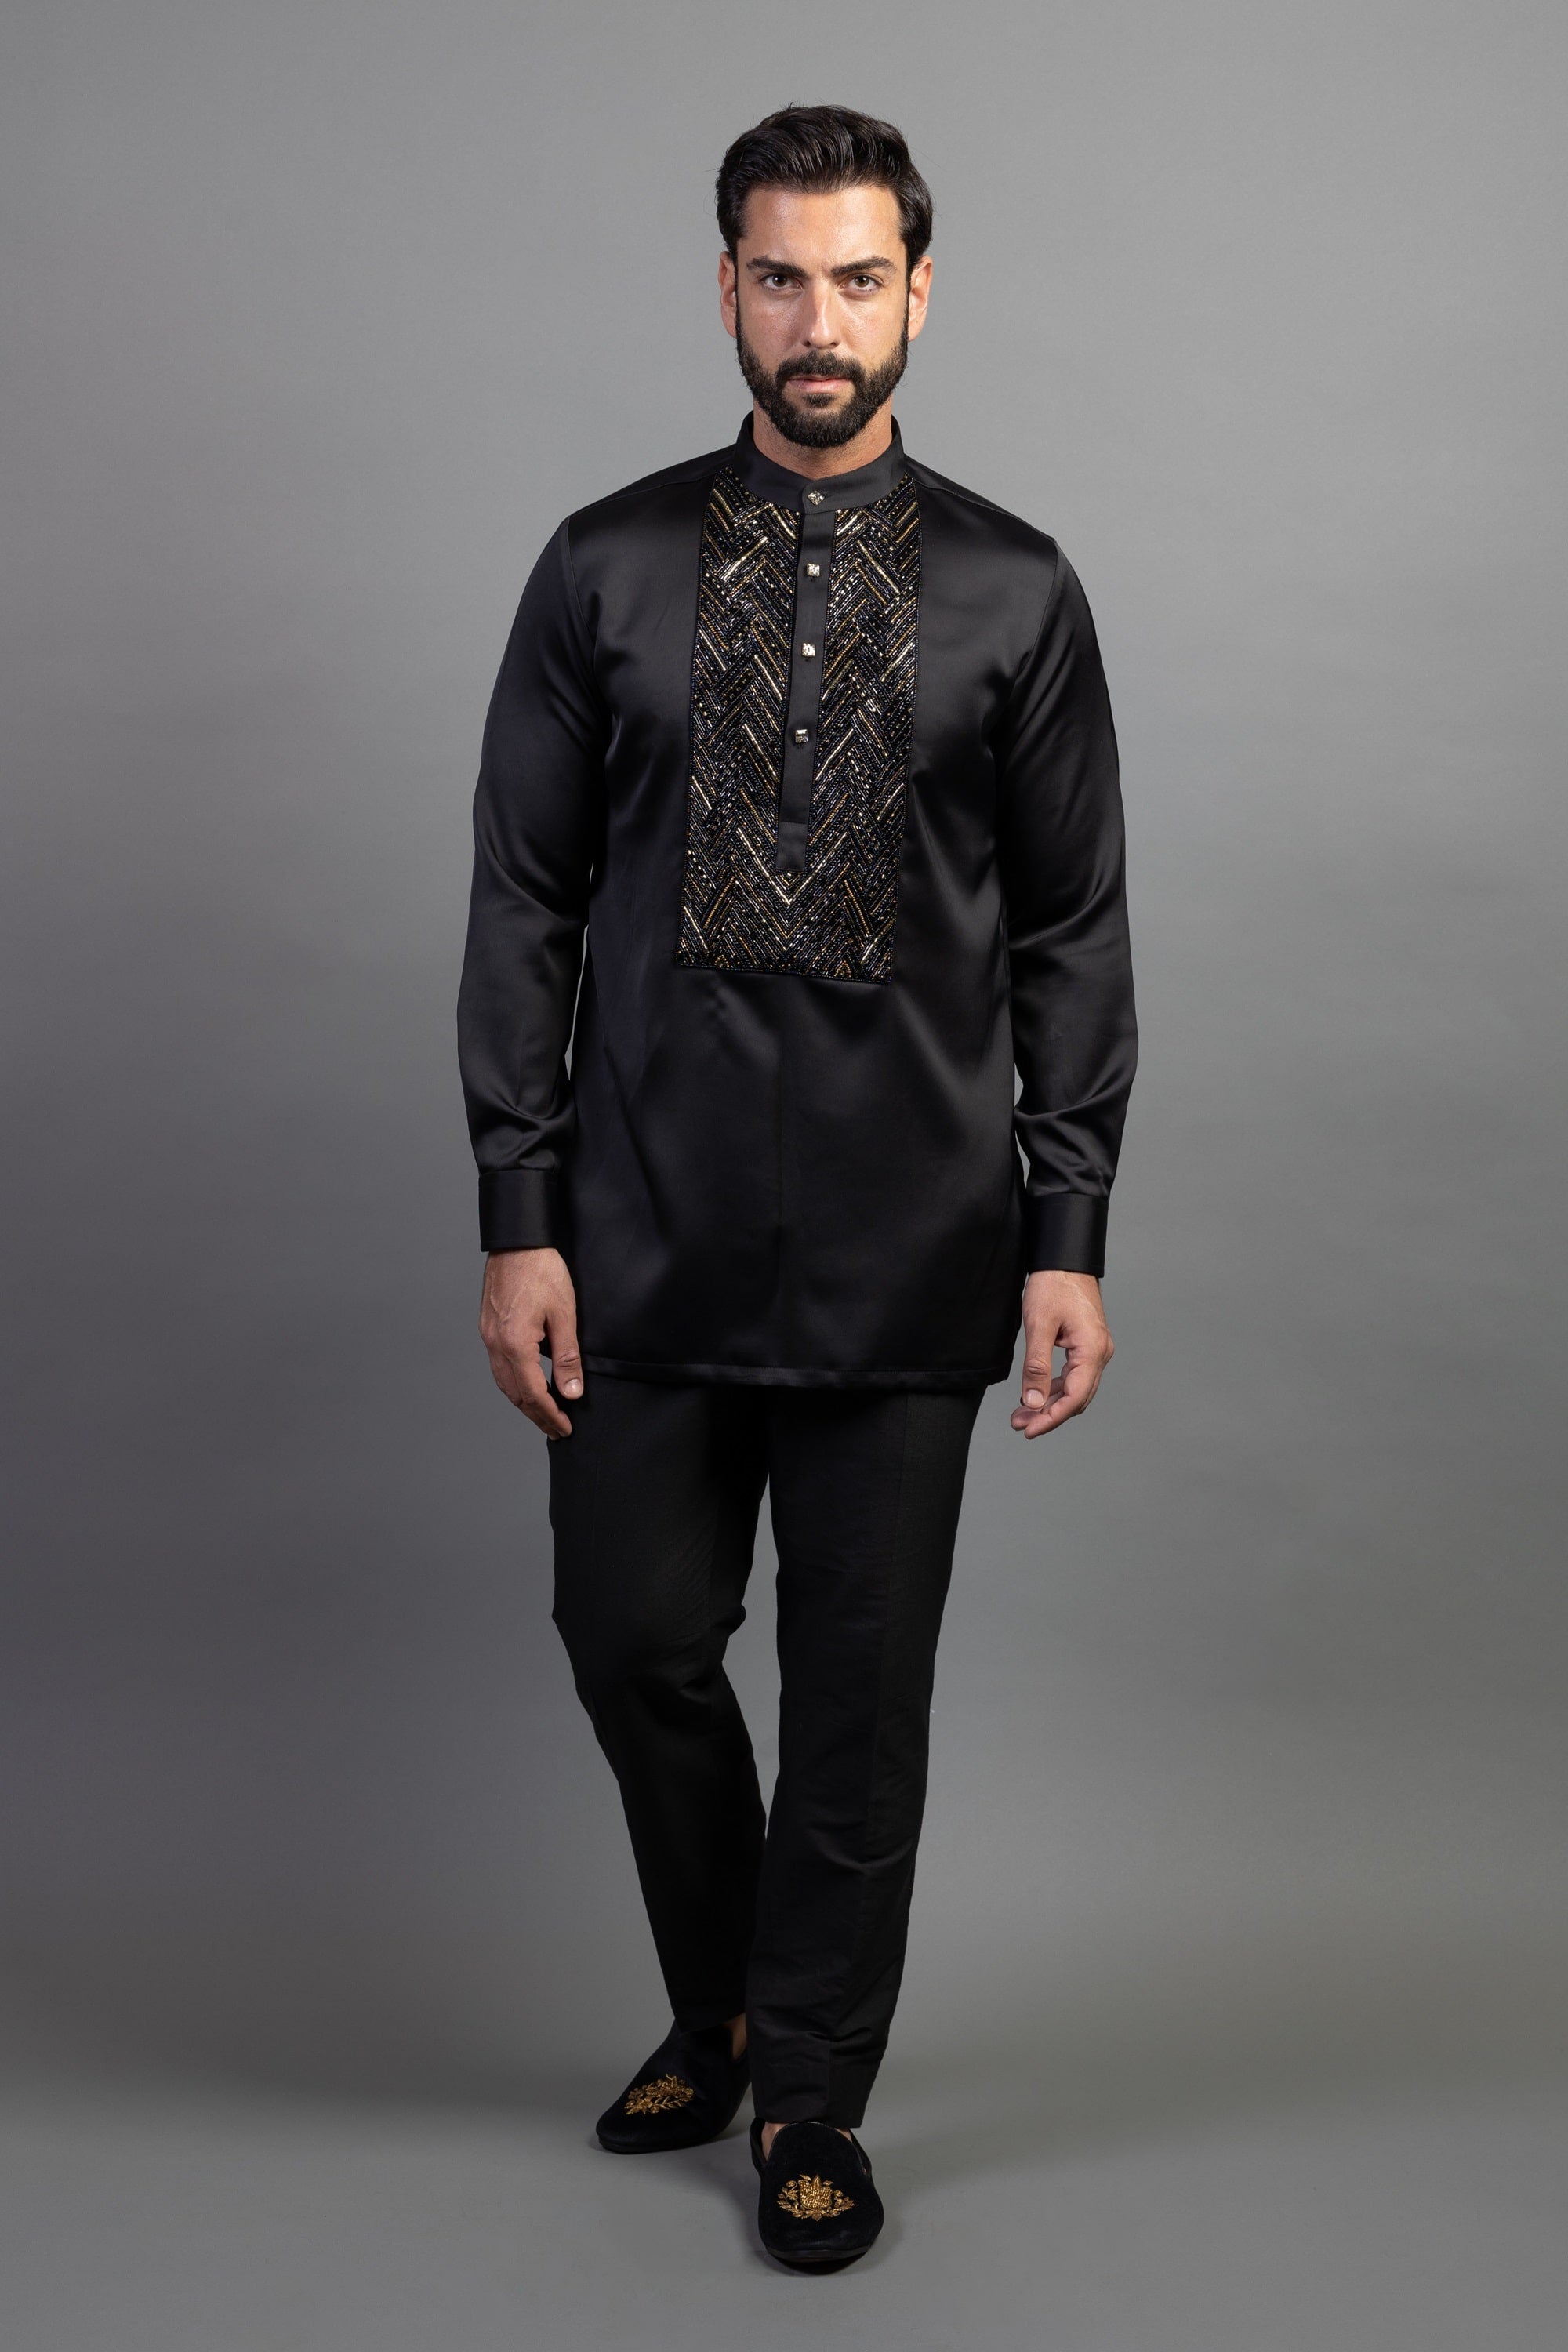 10 Things To Make Your Sangeet Ceremony Function Fun And Exciting | Wedding  kurta for men, Indian wedding clothes for men, Groom dress men